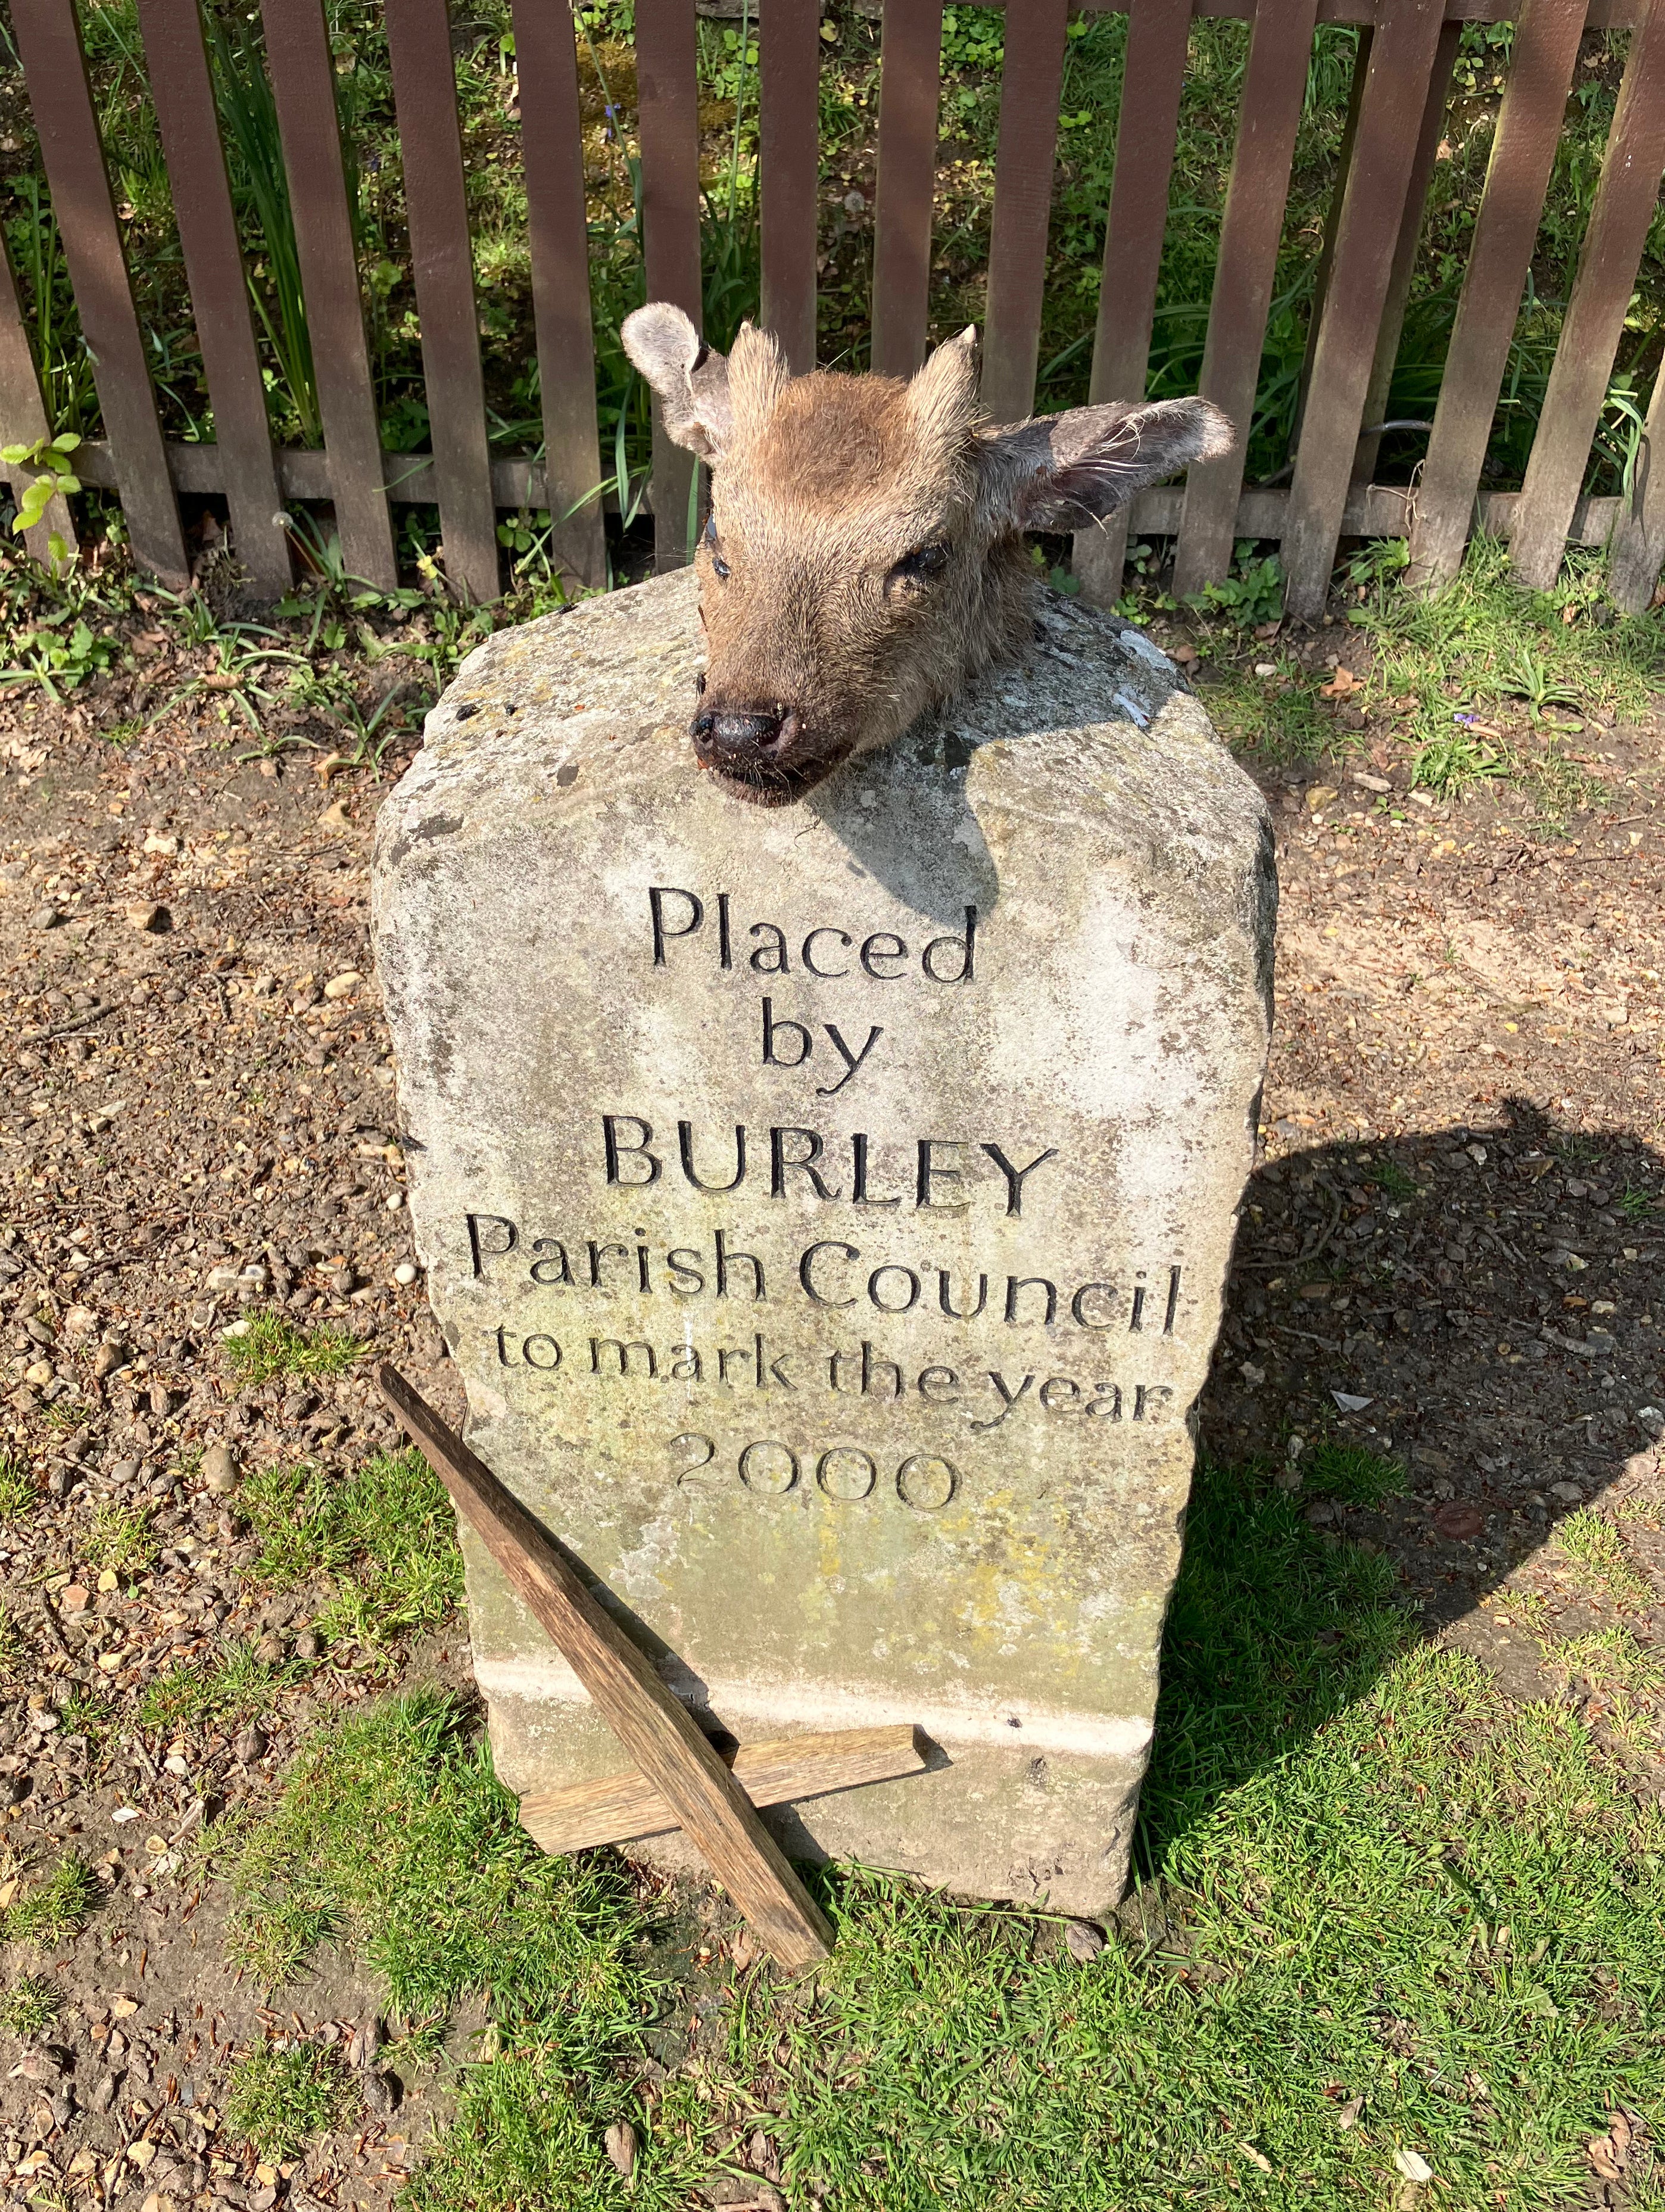 The deer head on a New Forest memorial stone and an upside down cross place next to it in Burley village